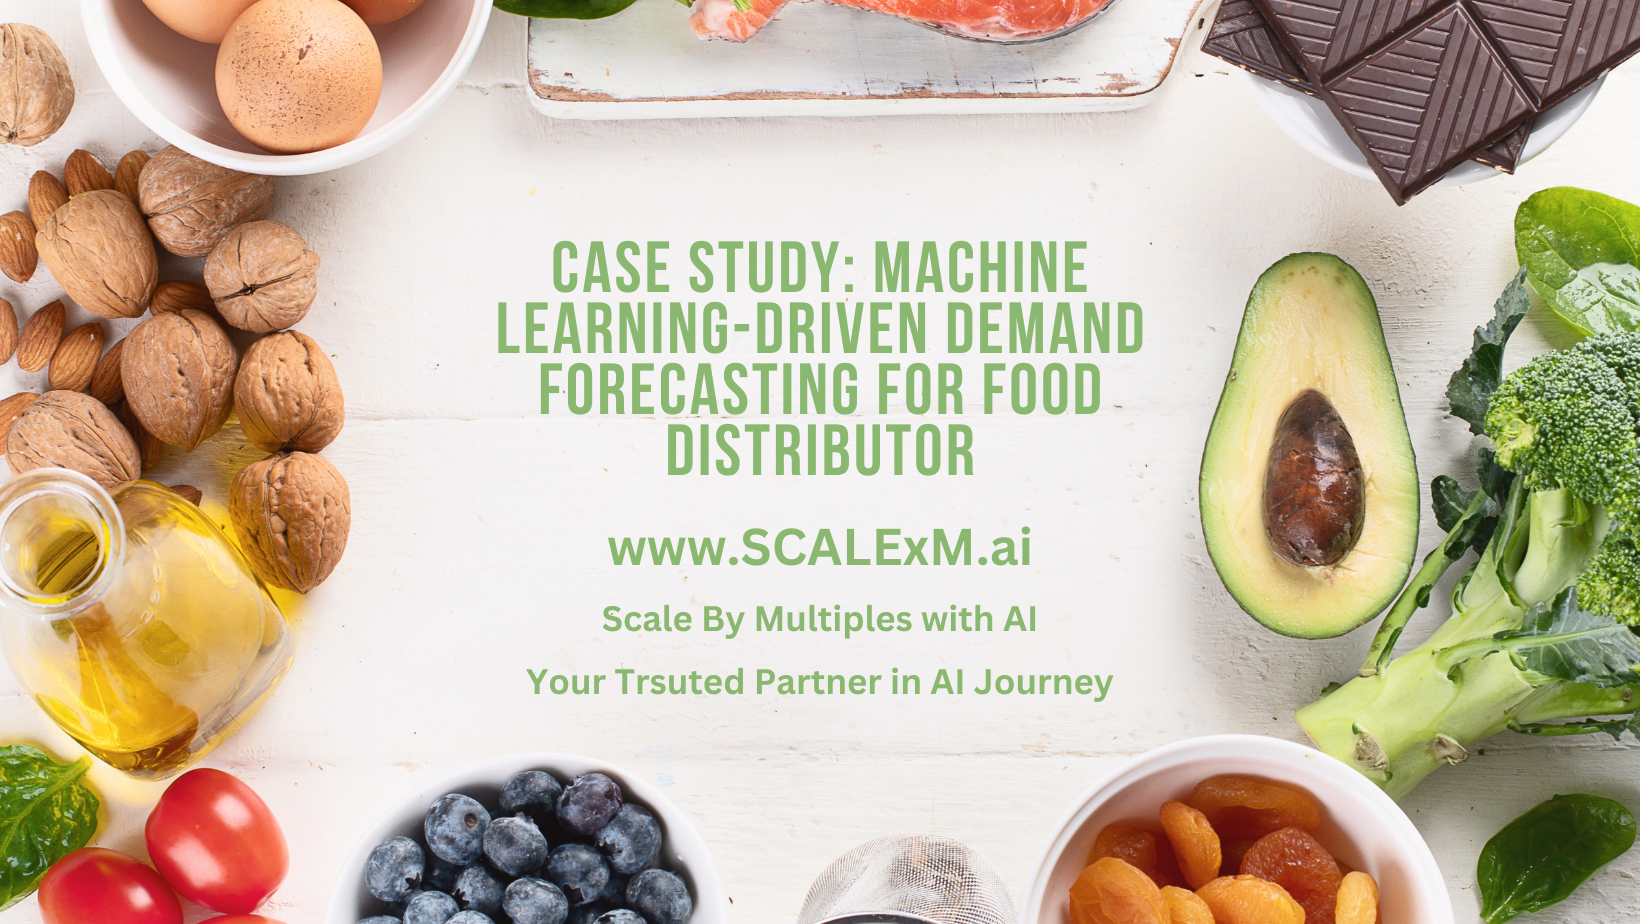 Case Study Machine Learning-Driven Demand Forecasting for Optimized Inventory